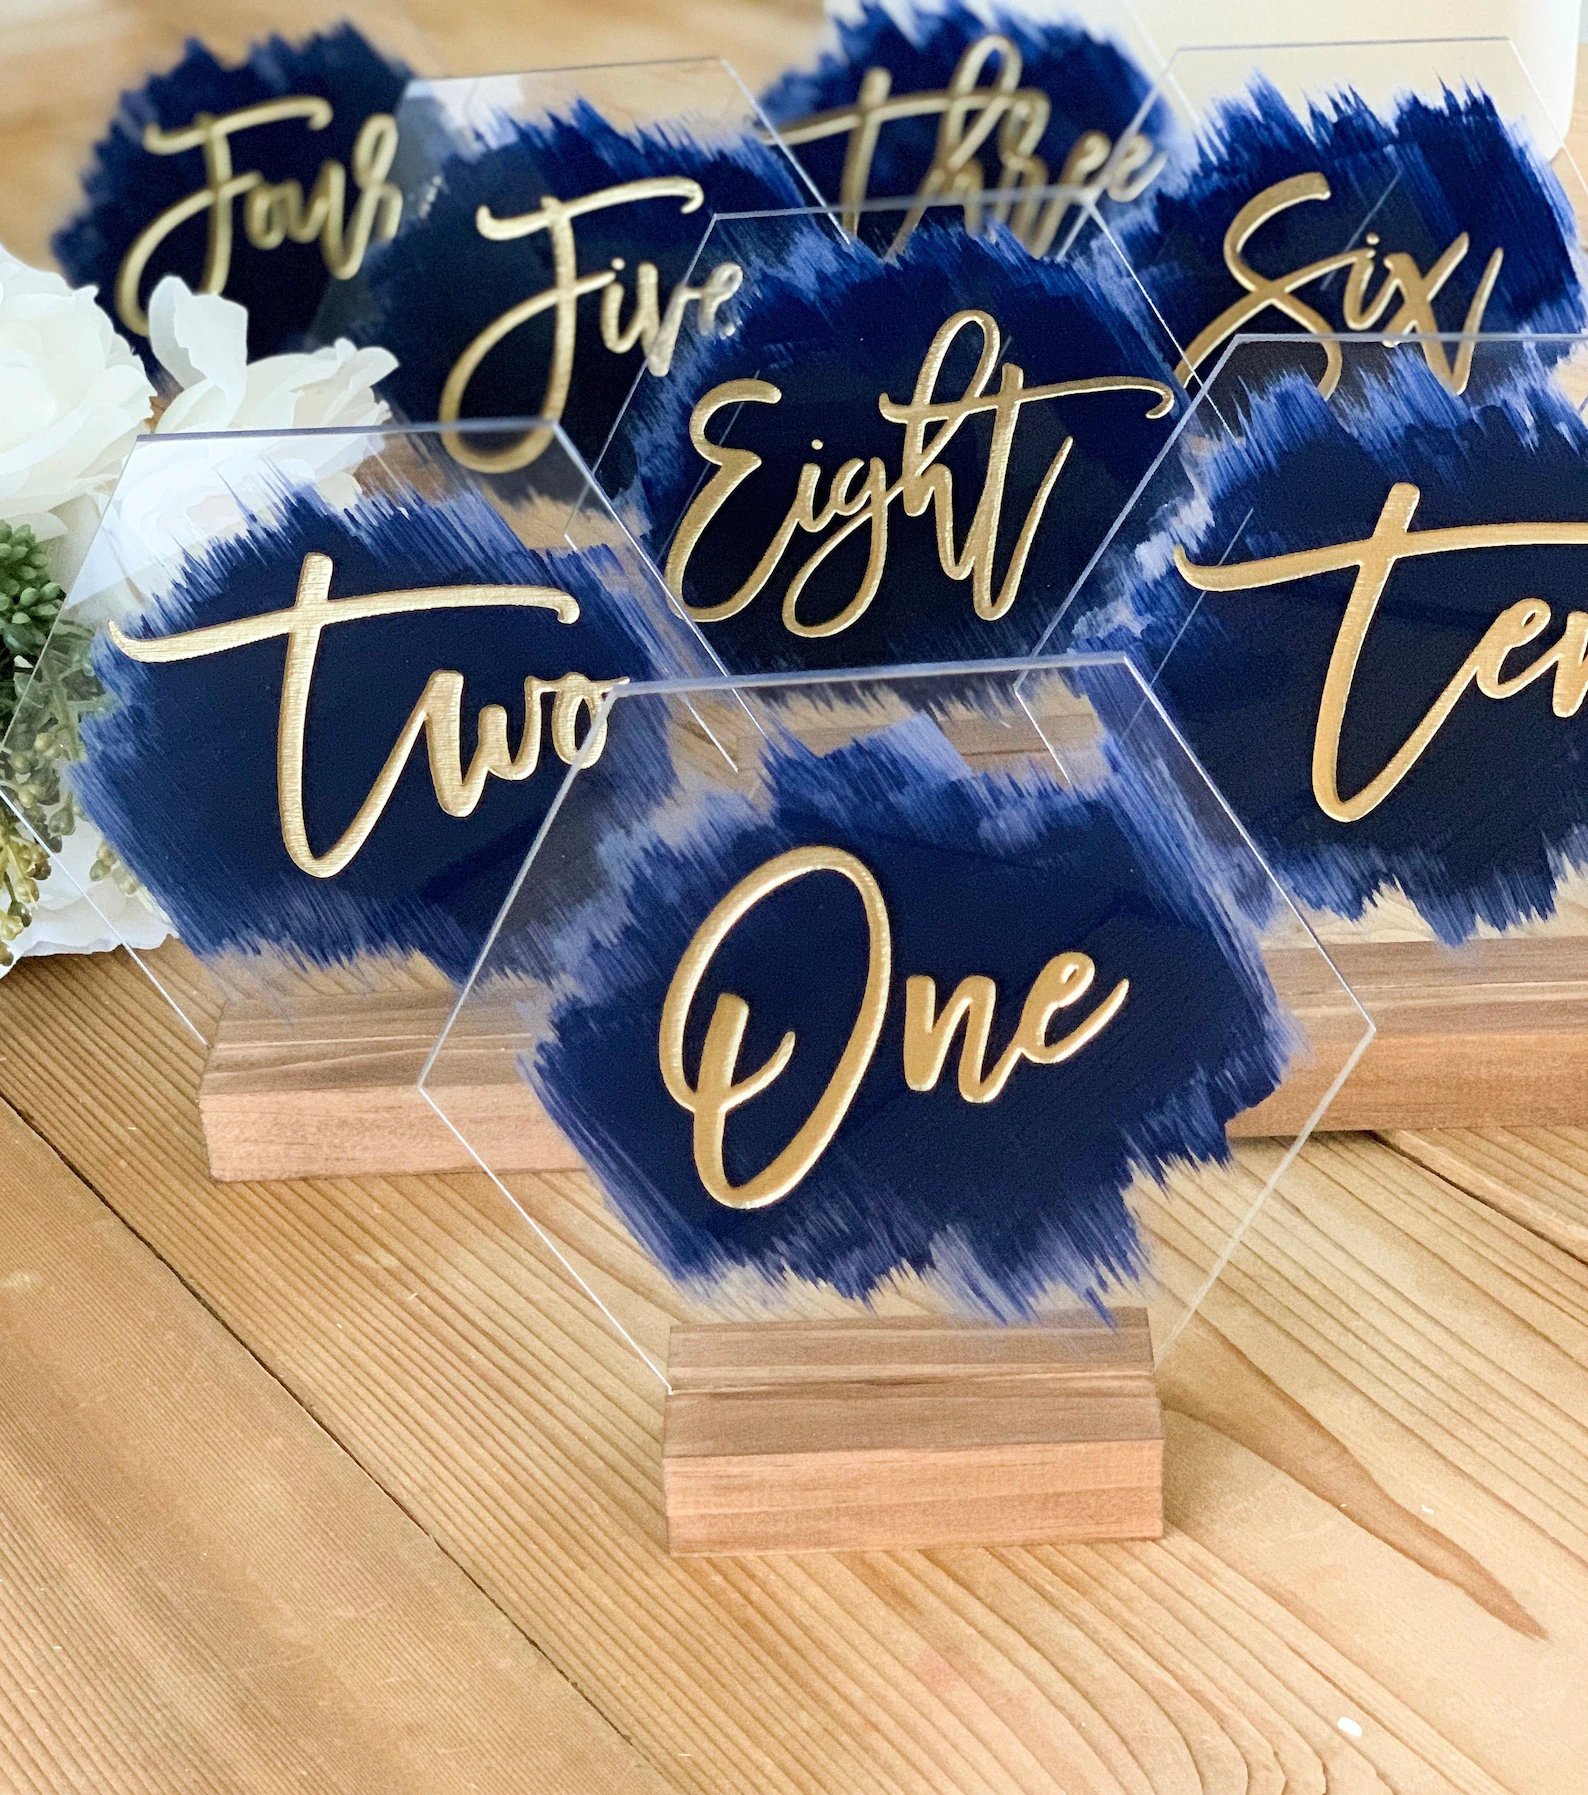 Lavender and Navy Blue Wedding table numbers